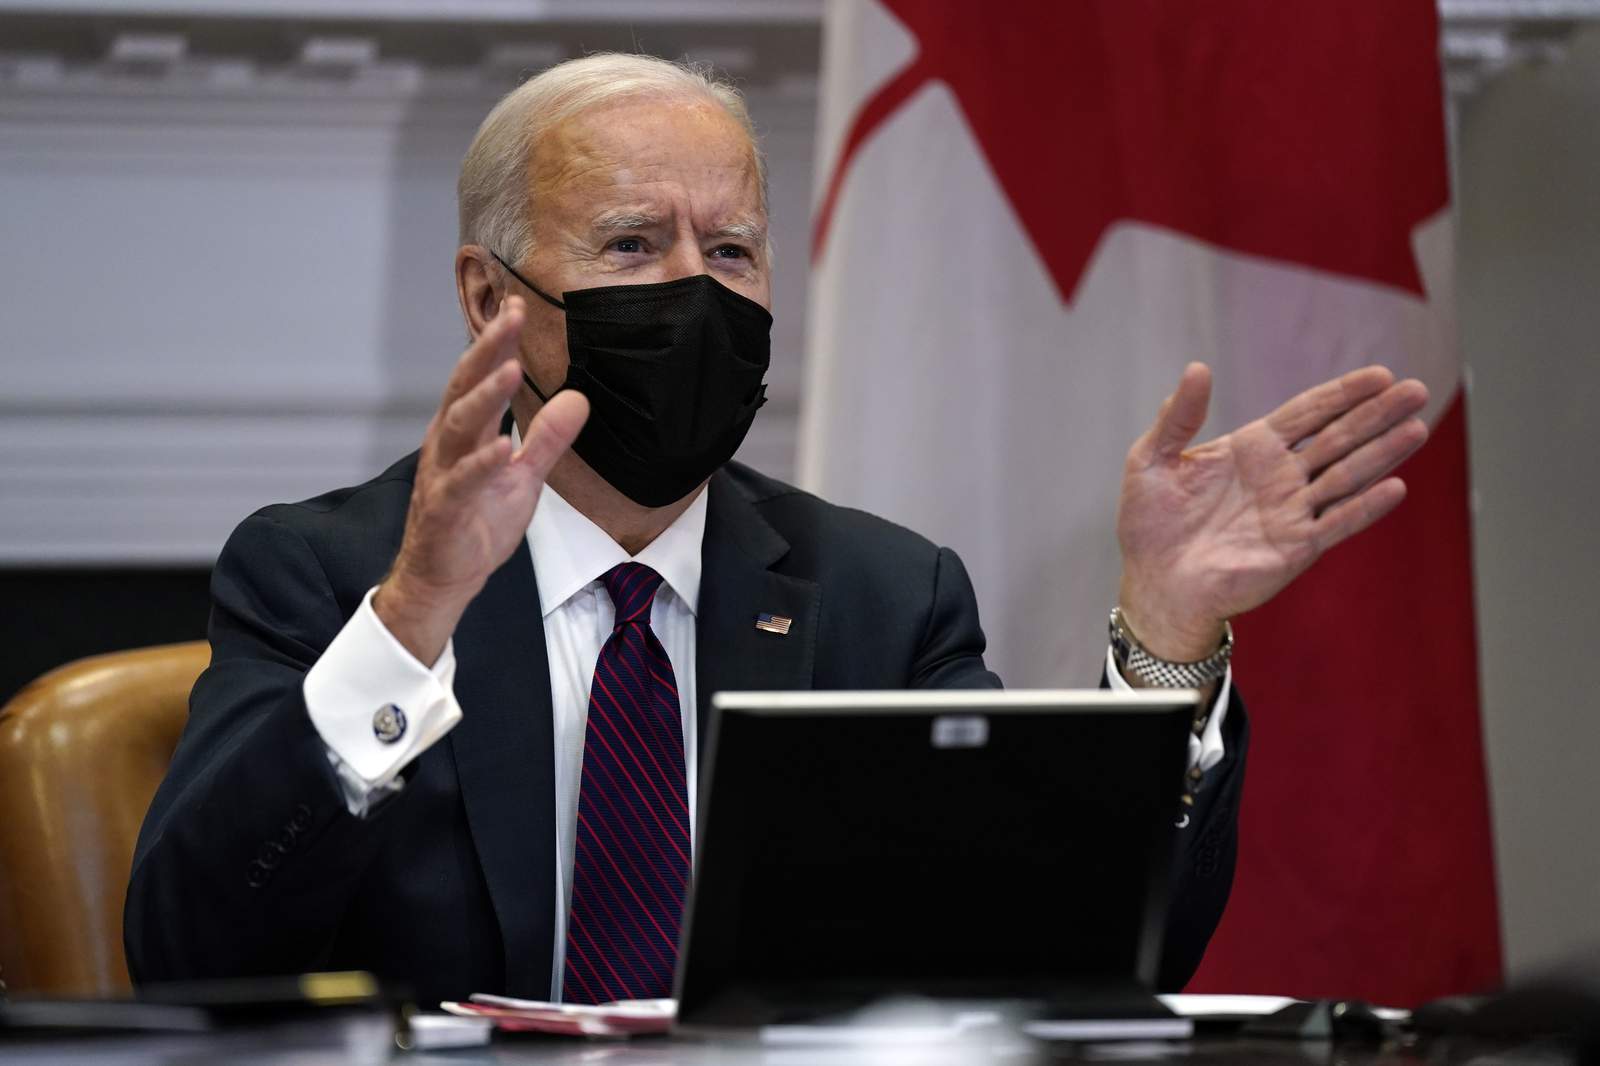 Biden aims to distribute masks to millions in 'equity' push